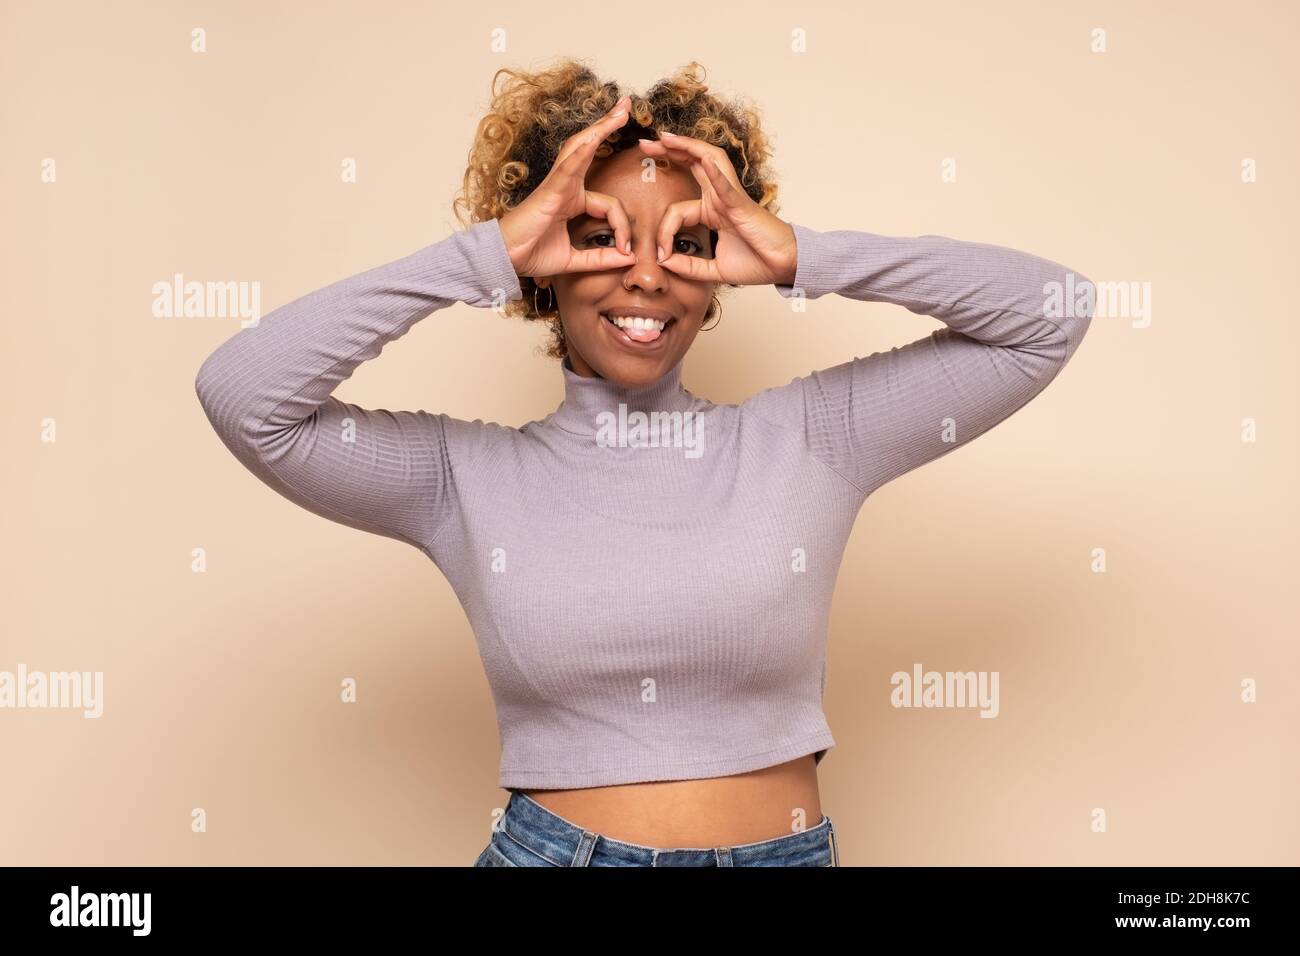 What is there. African woman making glasses shape, looking through binoculars gesture with shocked expression. Studio shot Stock Photo